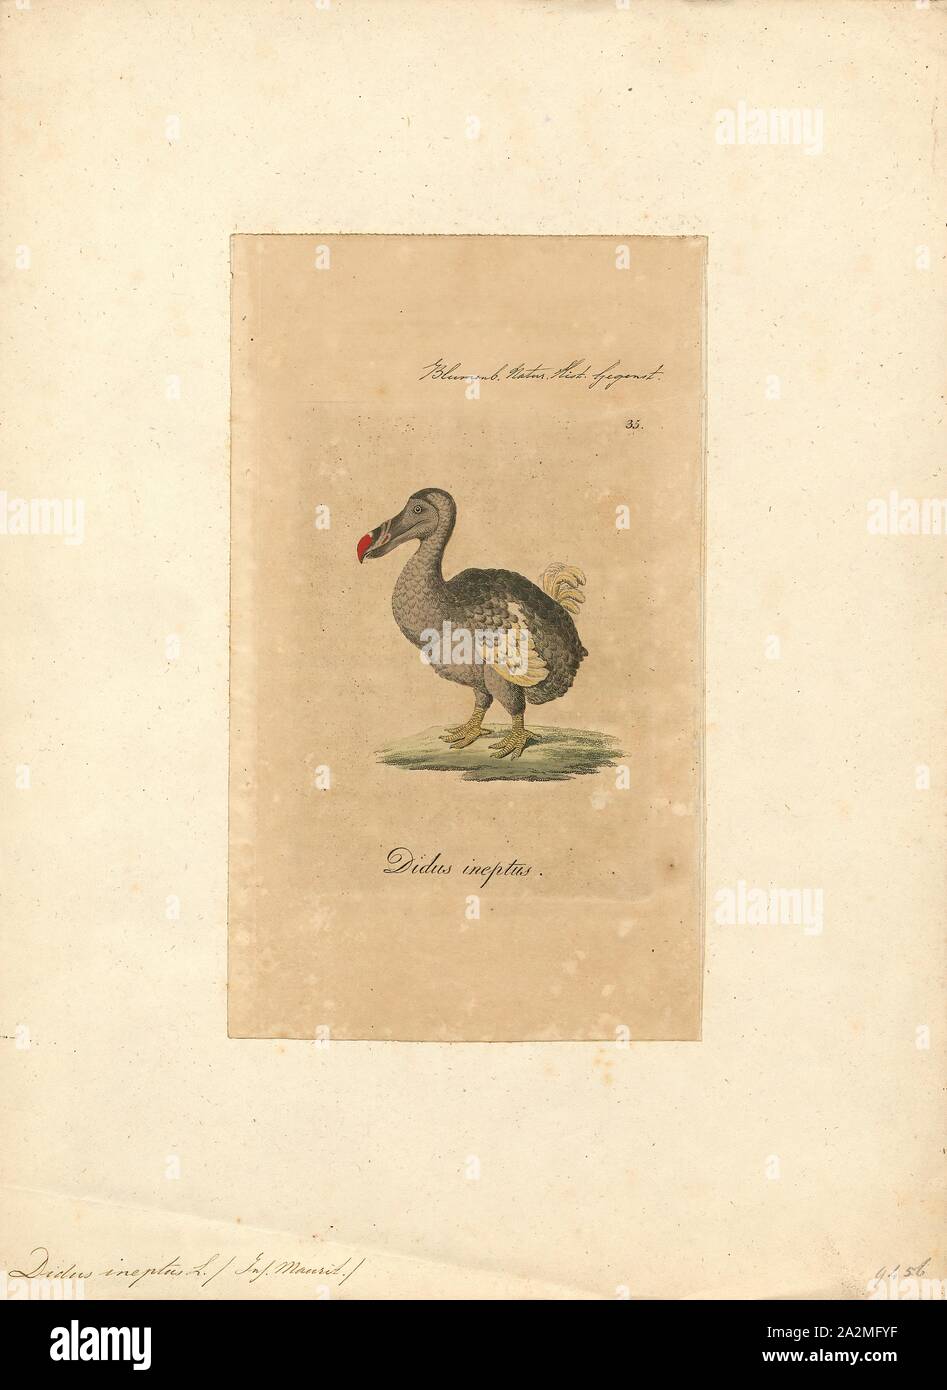 Didus ineptus, Print, The dodo (Raphus cucullatus) is an extinct flightless bird that was endemic to the island of Mauritius, east of Madagascar in the Indian Ocean. The dodo's closest genetic relative was the also-extinct Rodrigues solitaire, the two forming the subfamily Raphinae of the family of pigeons and doves. The closest living relative of the dodo is the Nicobar pigeon. A white dodo was once thought to have existed on the nearby island of Réunion, but this is now thought to have been confusion based on the Réunion ibis and paintings of white dodos., 1810 Stock Photo